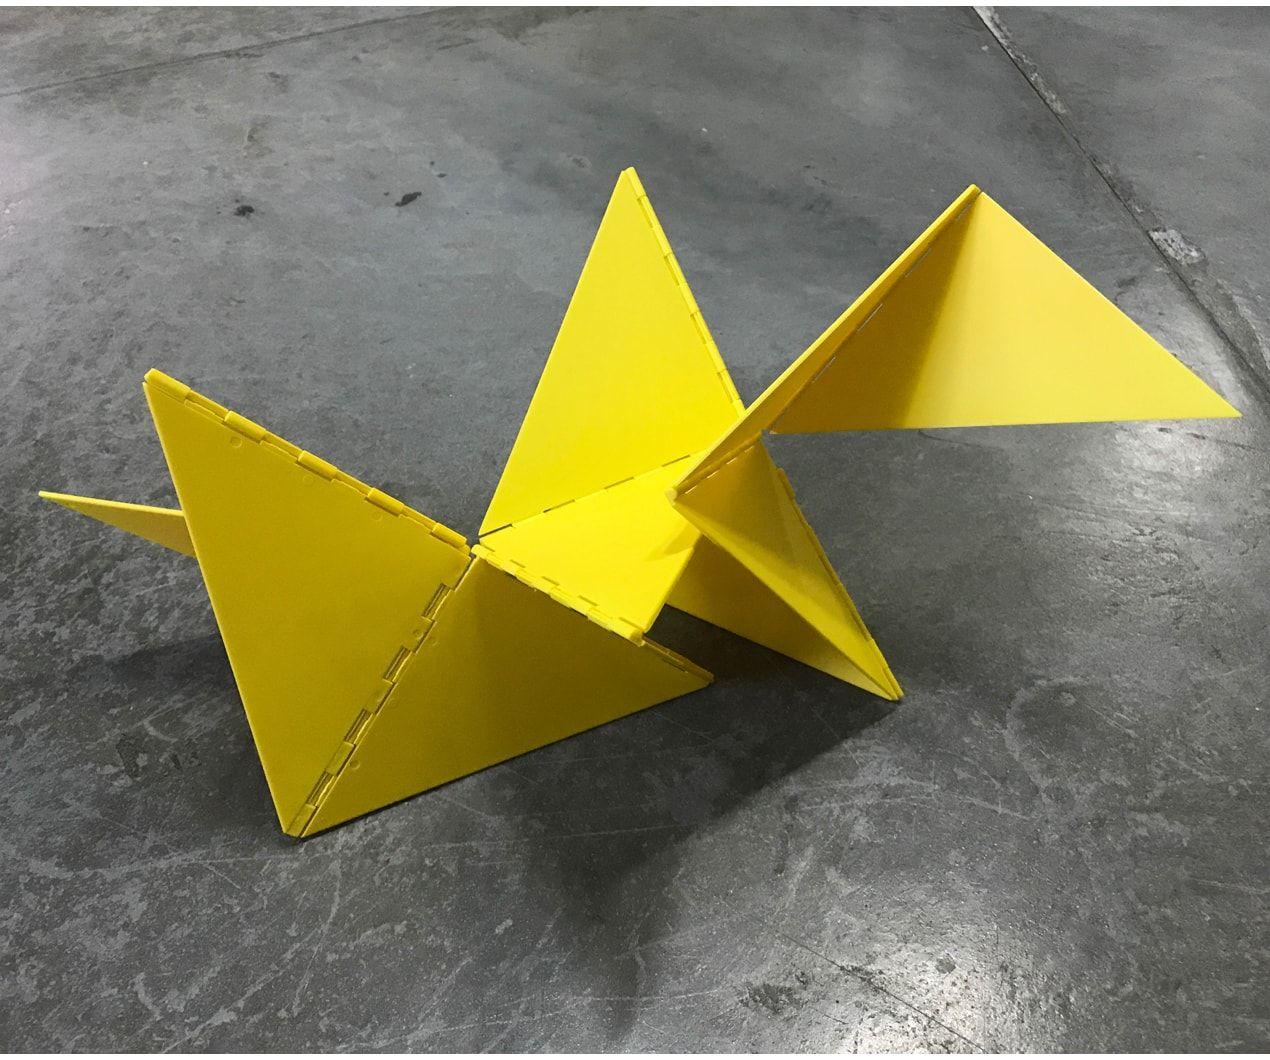 Model based on the work of Lygia Clark, authorized by the heirs and by the cultural association 